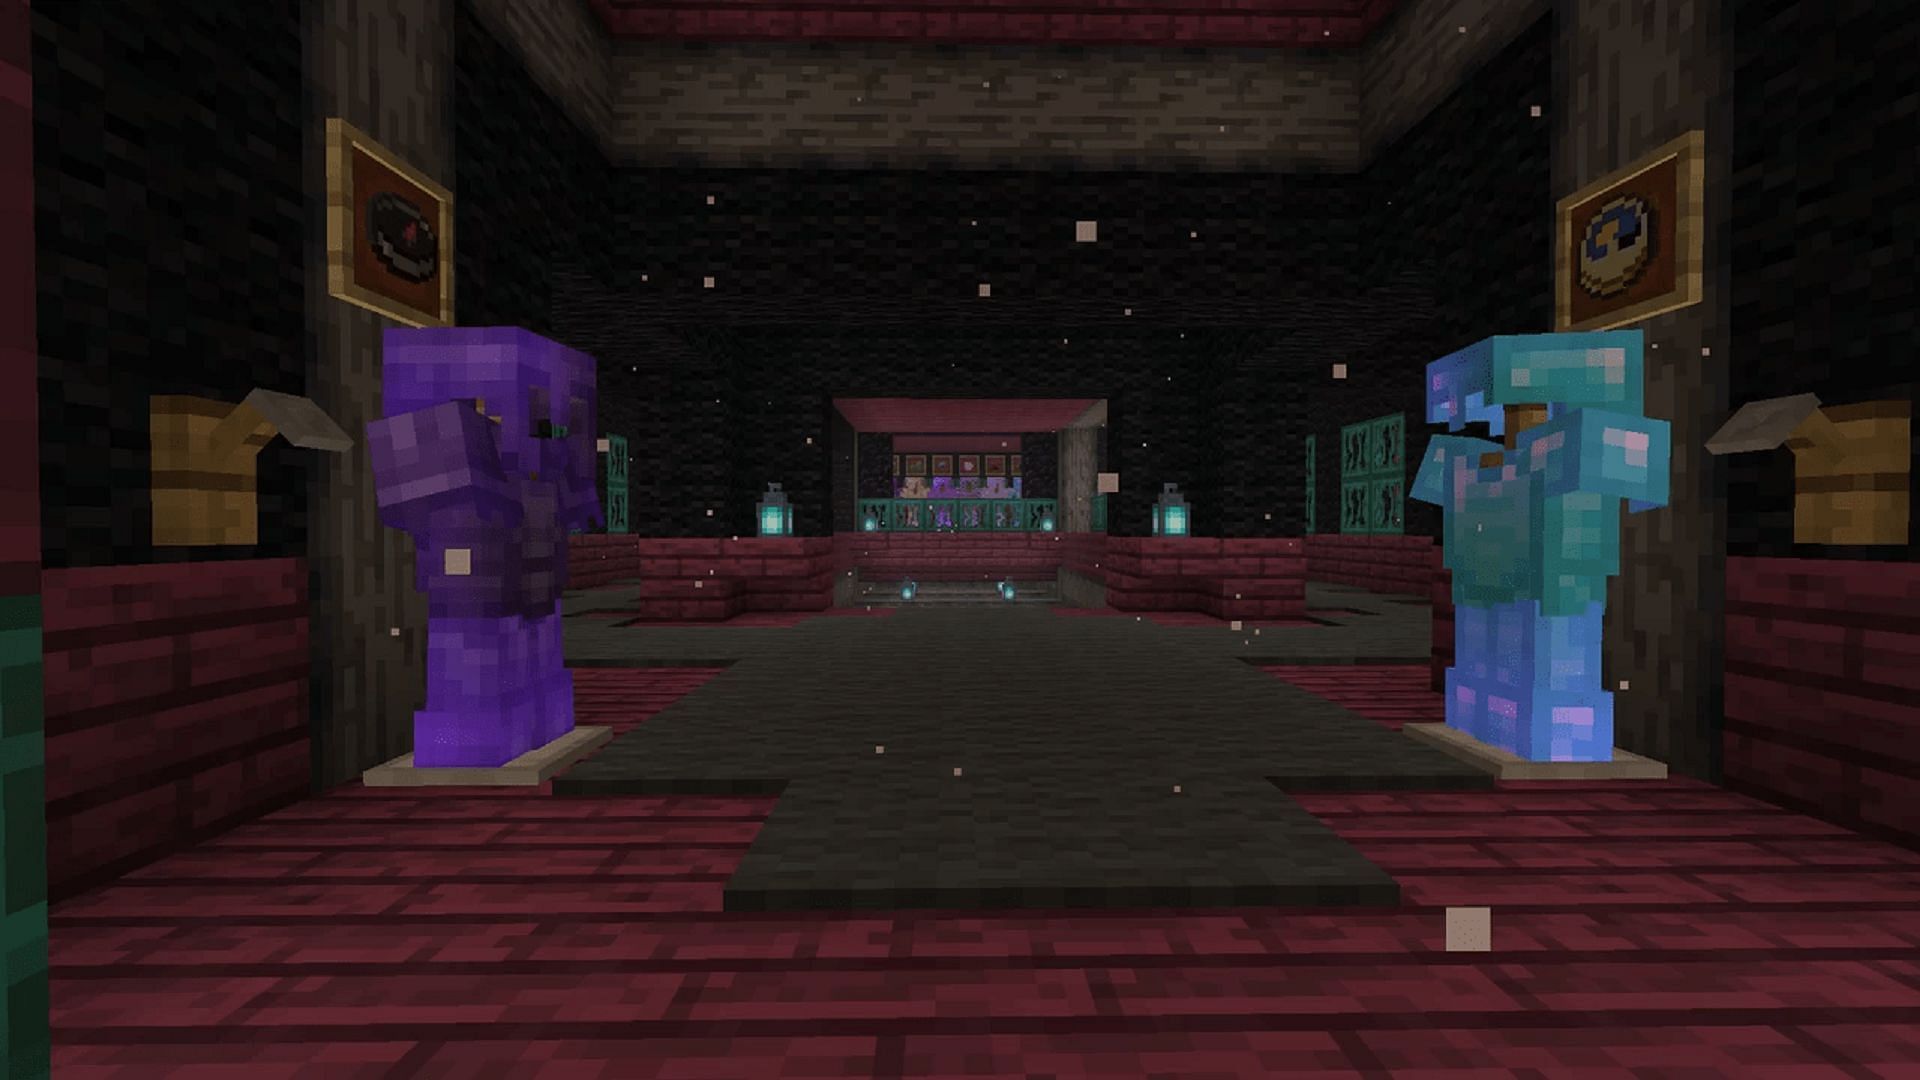 An interior room in the Nether mansion (Image via Elicorne/Planet Minecraft)